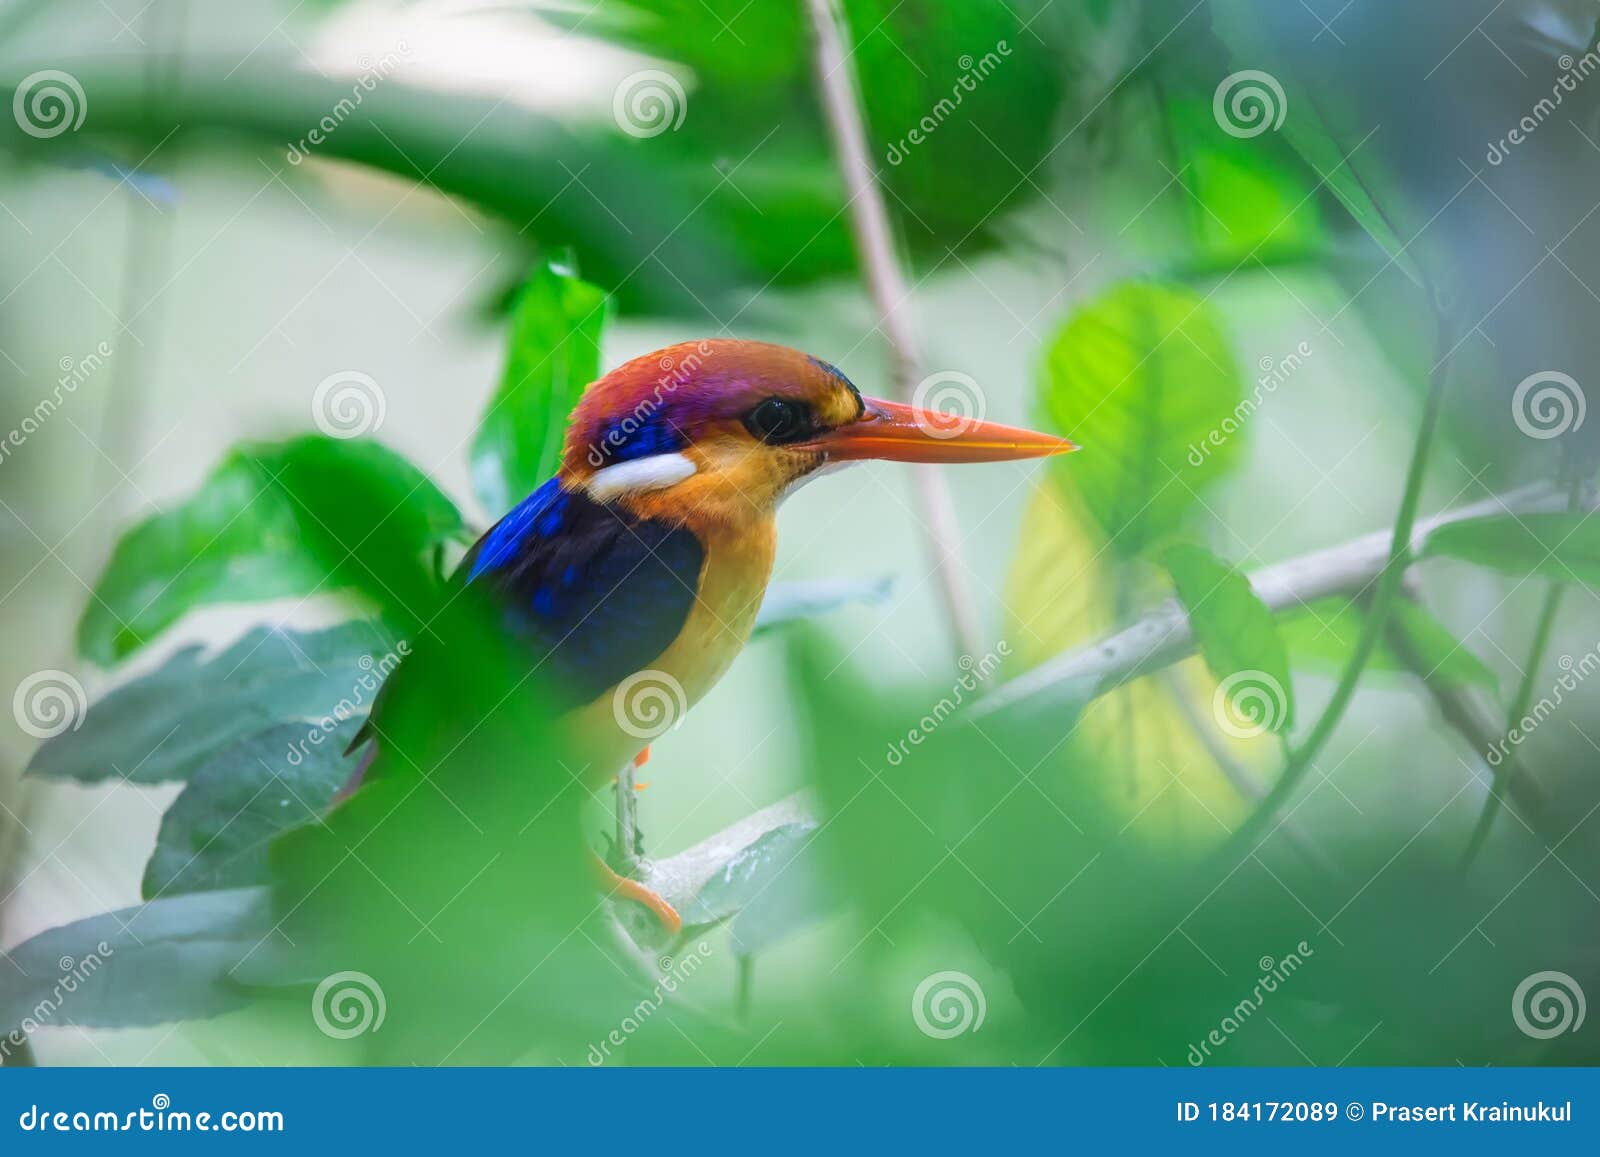 the oriental dwarf kingfisher also known as the black-backed kingfisher or three-toed kingfisher ceyx erithaca is a species of